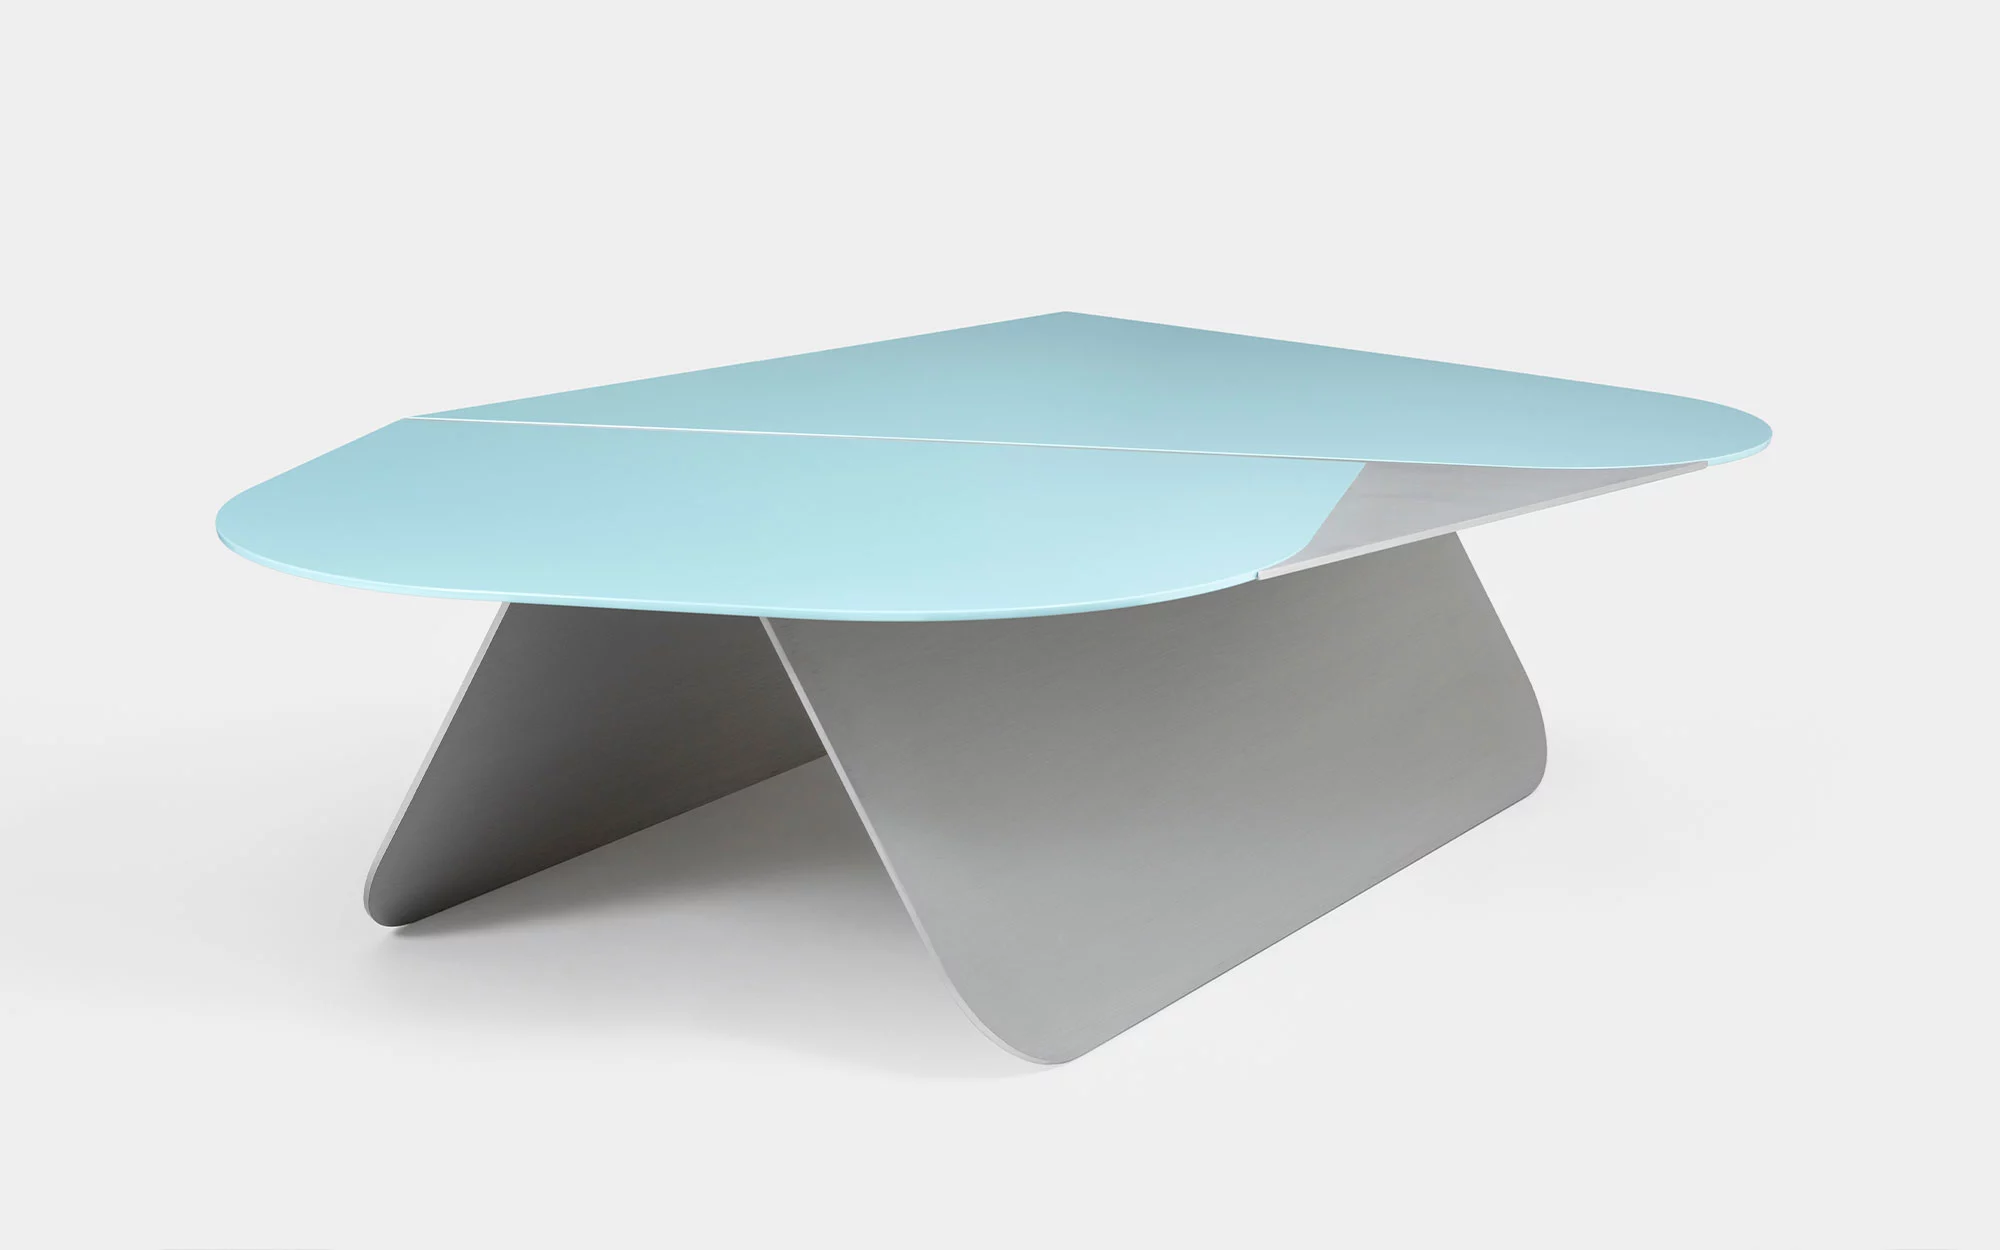 Large DB Coffee Table - Pierre Charpin - 20 years.